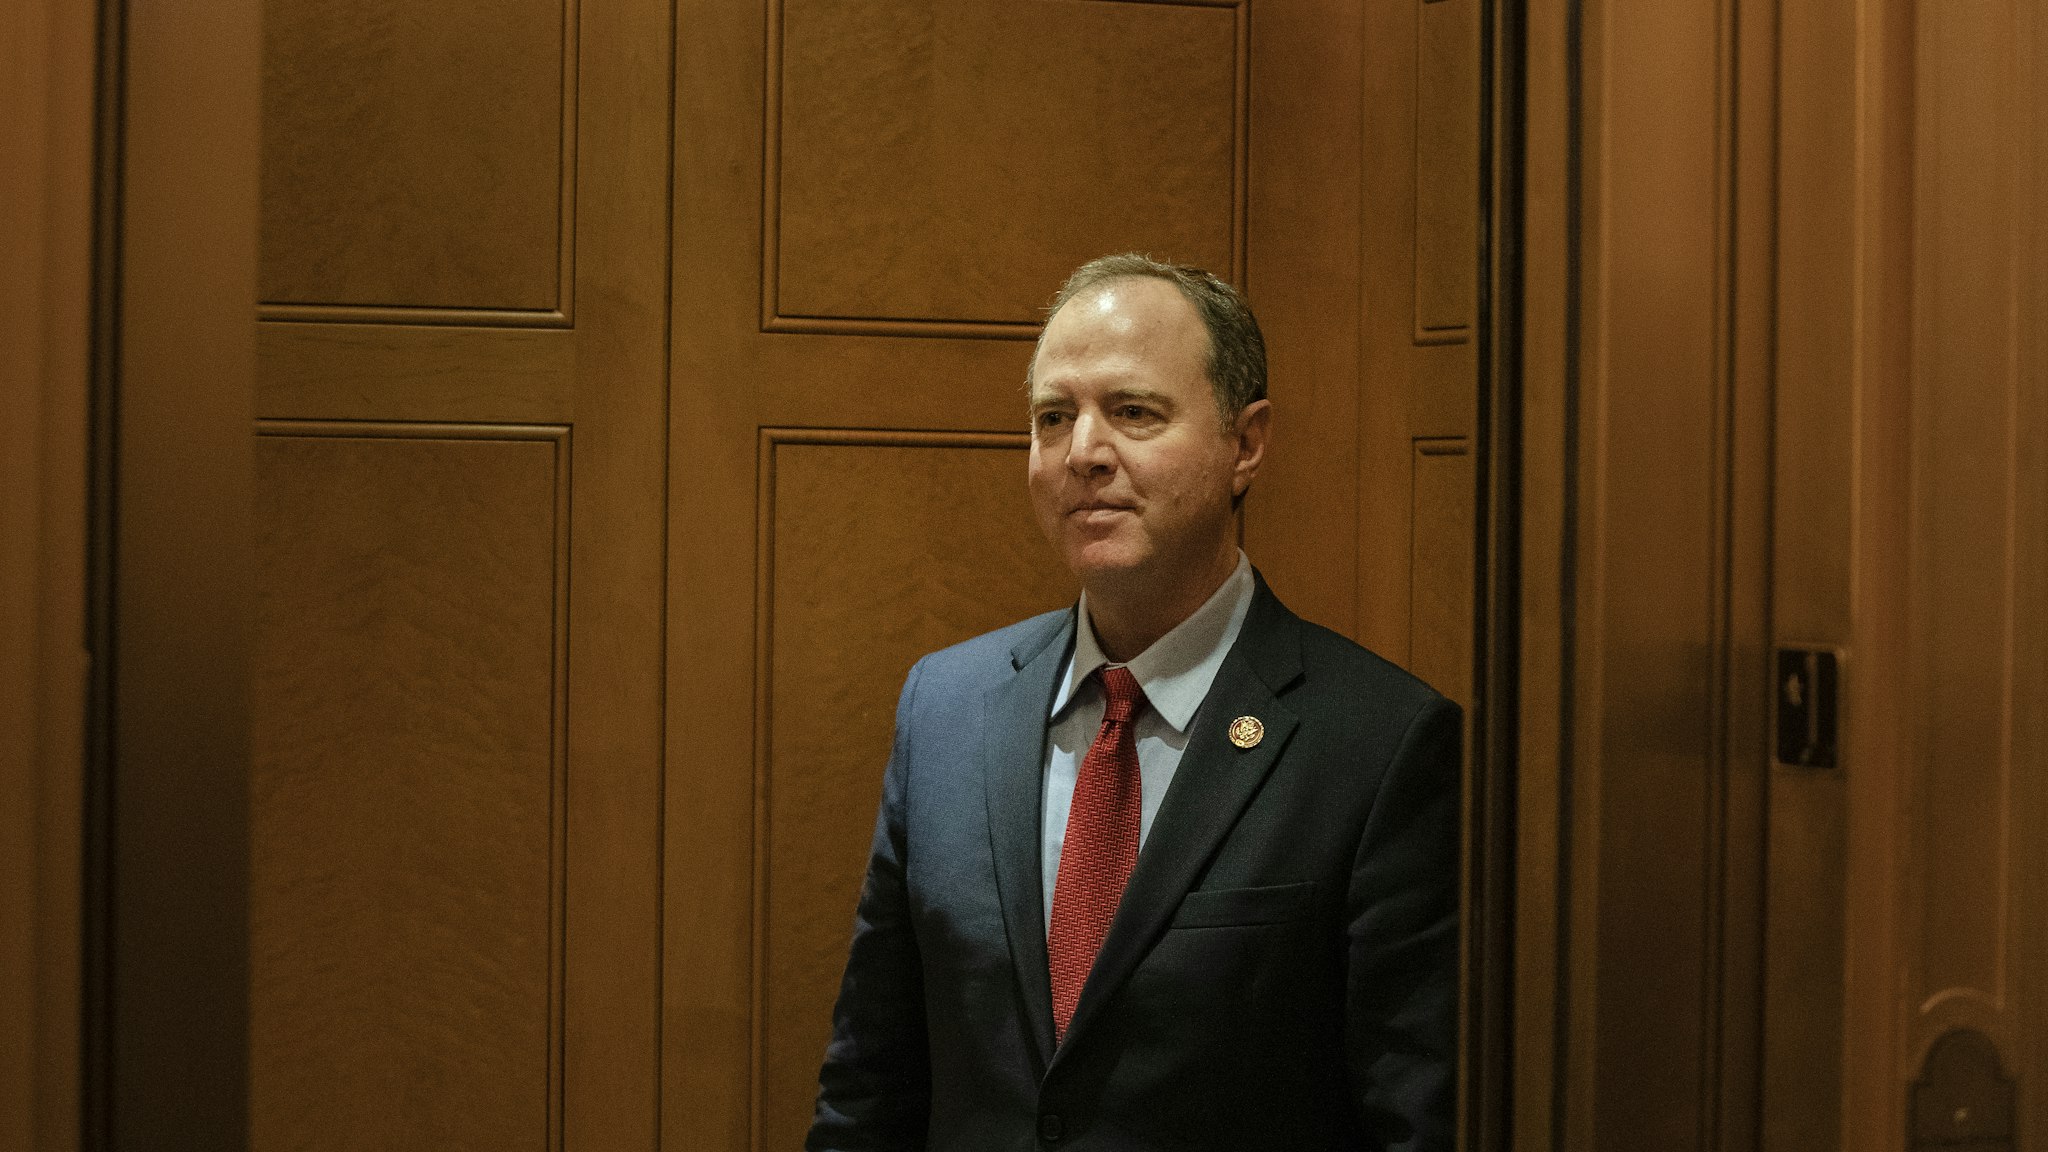 Representative Adam Schiff, a Democrat from California and chairman of the House Intelligence Committee, arrives for a closed-door deposition with George Kent, deputy assistant U.S. secretary of state, on Capitol Hill in Washington, D.C., U.S., on Tuesday, Oct. 15, 2019. Kent, who remains an employee of the State Department, is expected to testify under subpoena, says an official working on the impeachment inquiry. Photographer: Alex Edelman/Bloomberg via Getty Images